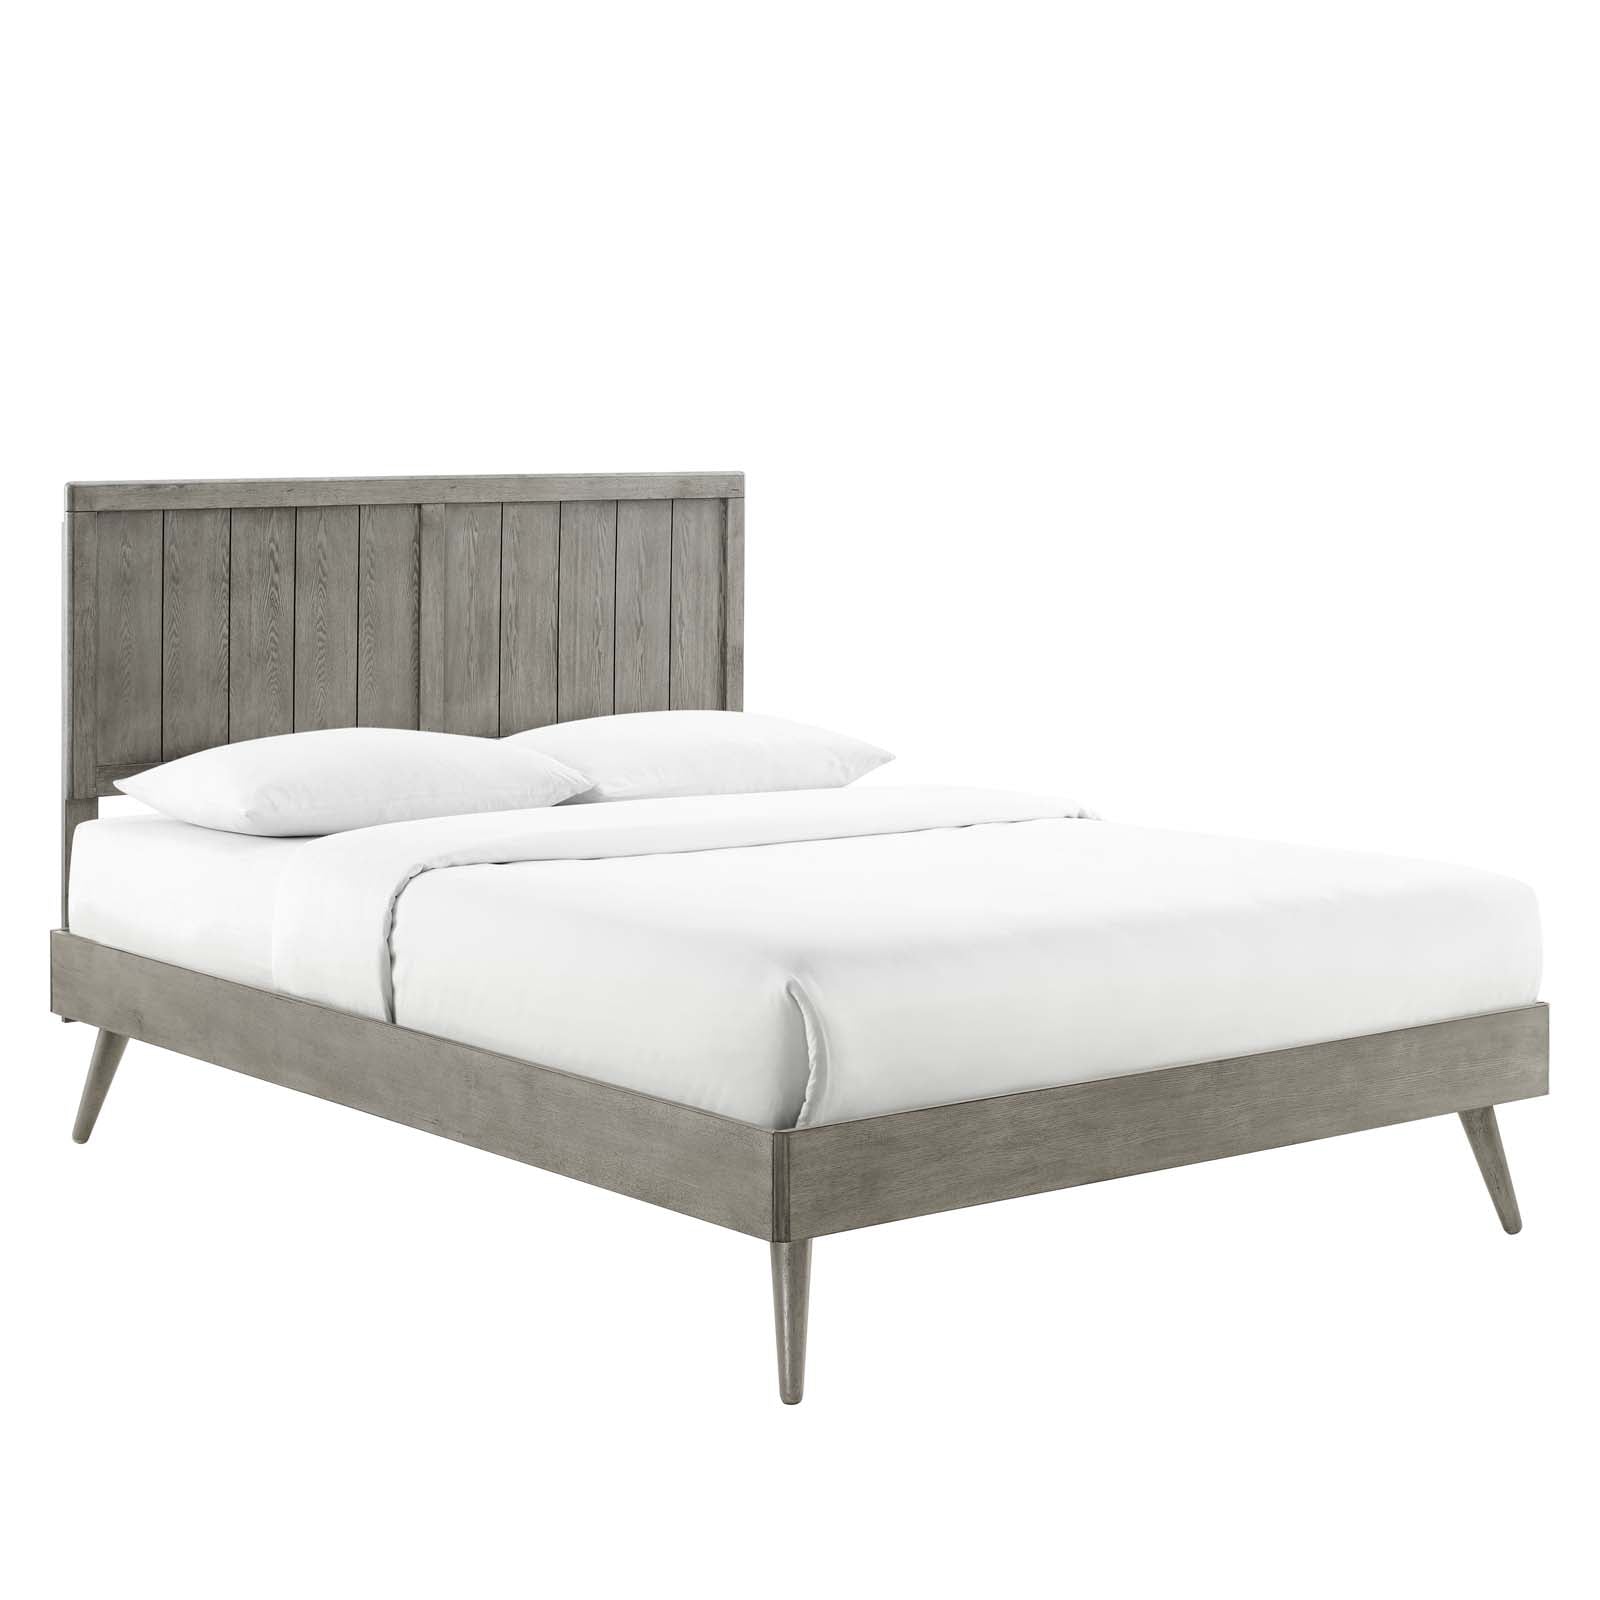 Alana Wood Platform Bed With Splayed Legs - East Shore Modern Home Furnishings